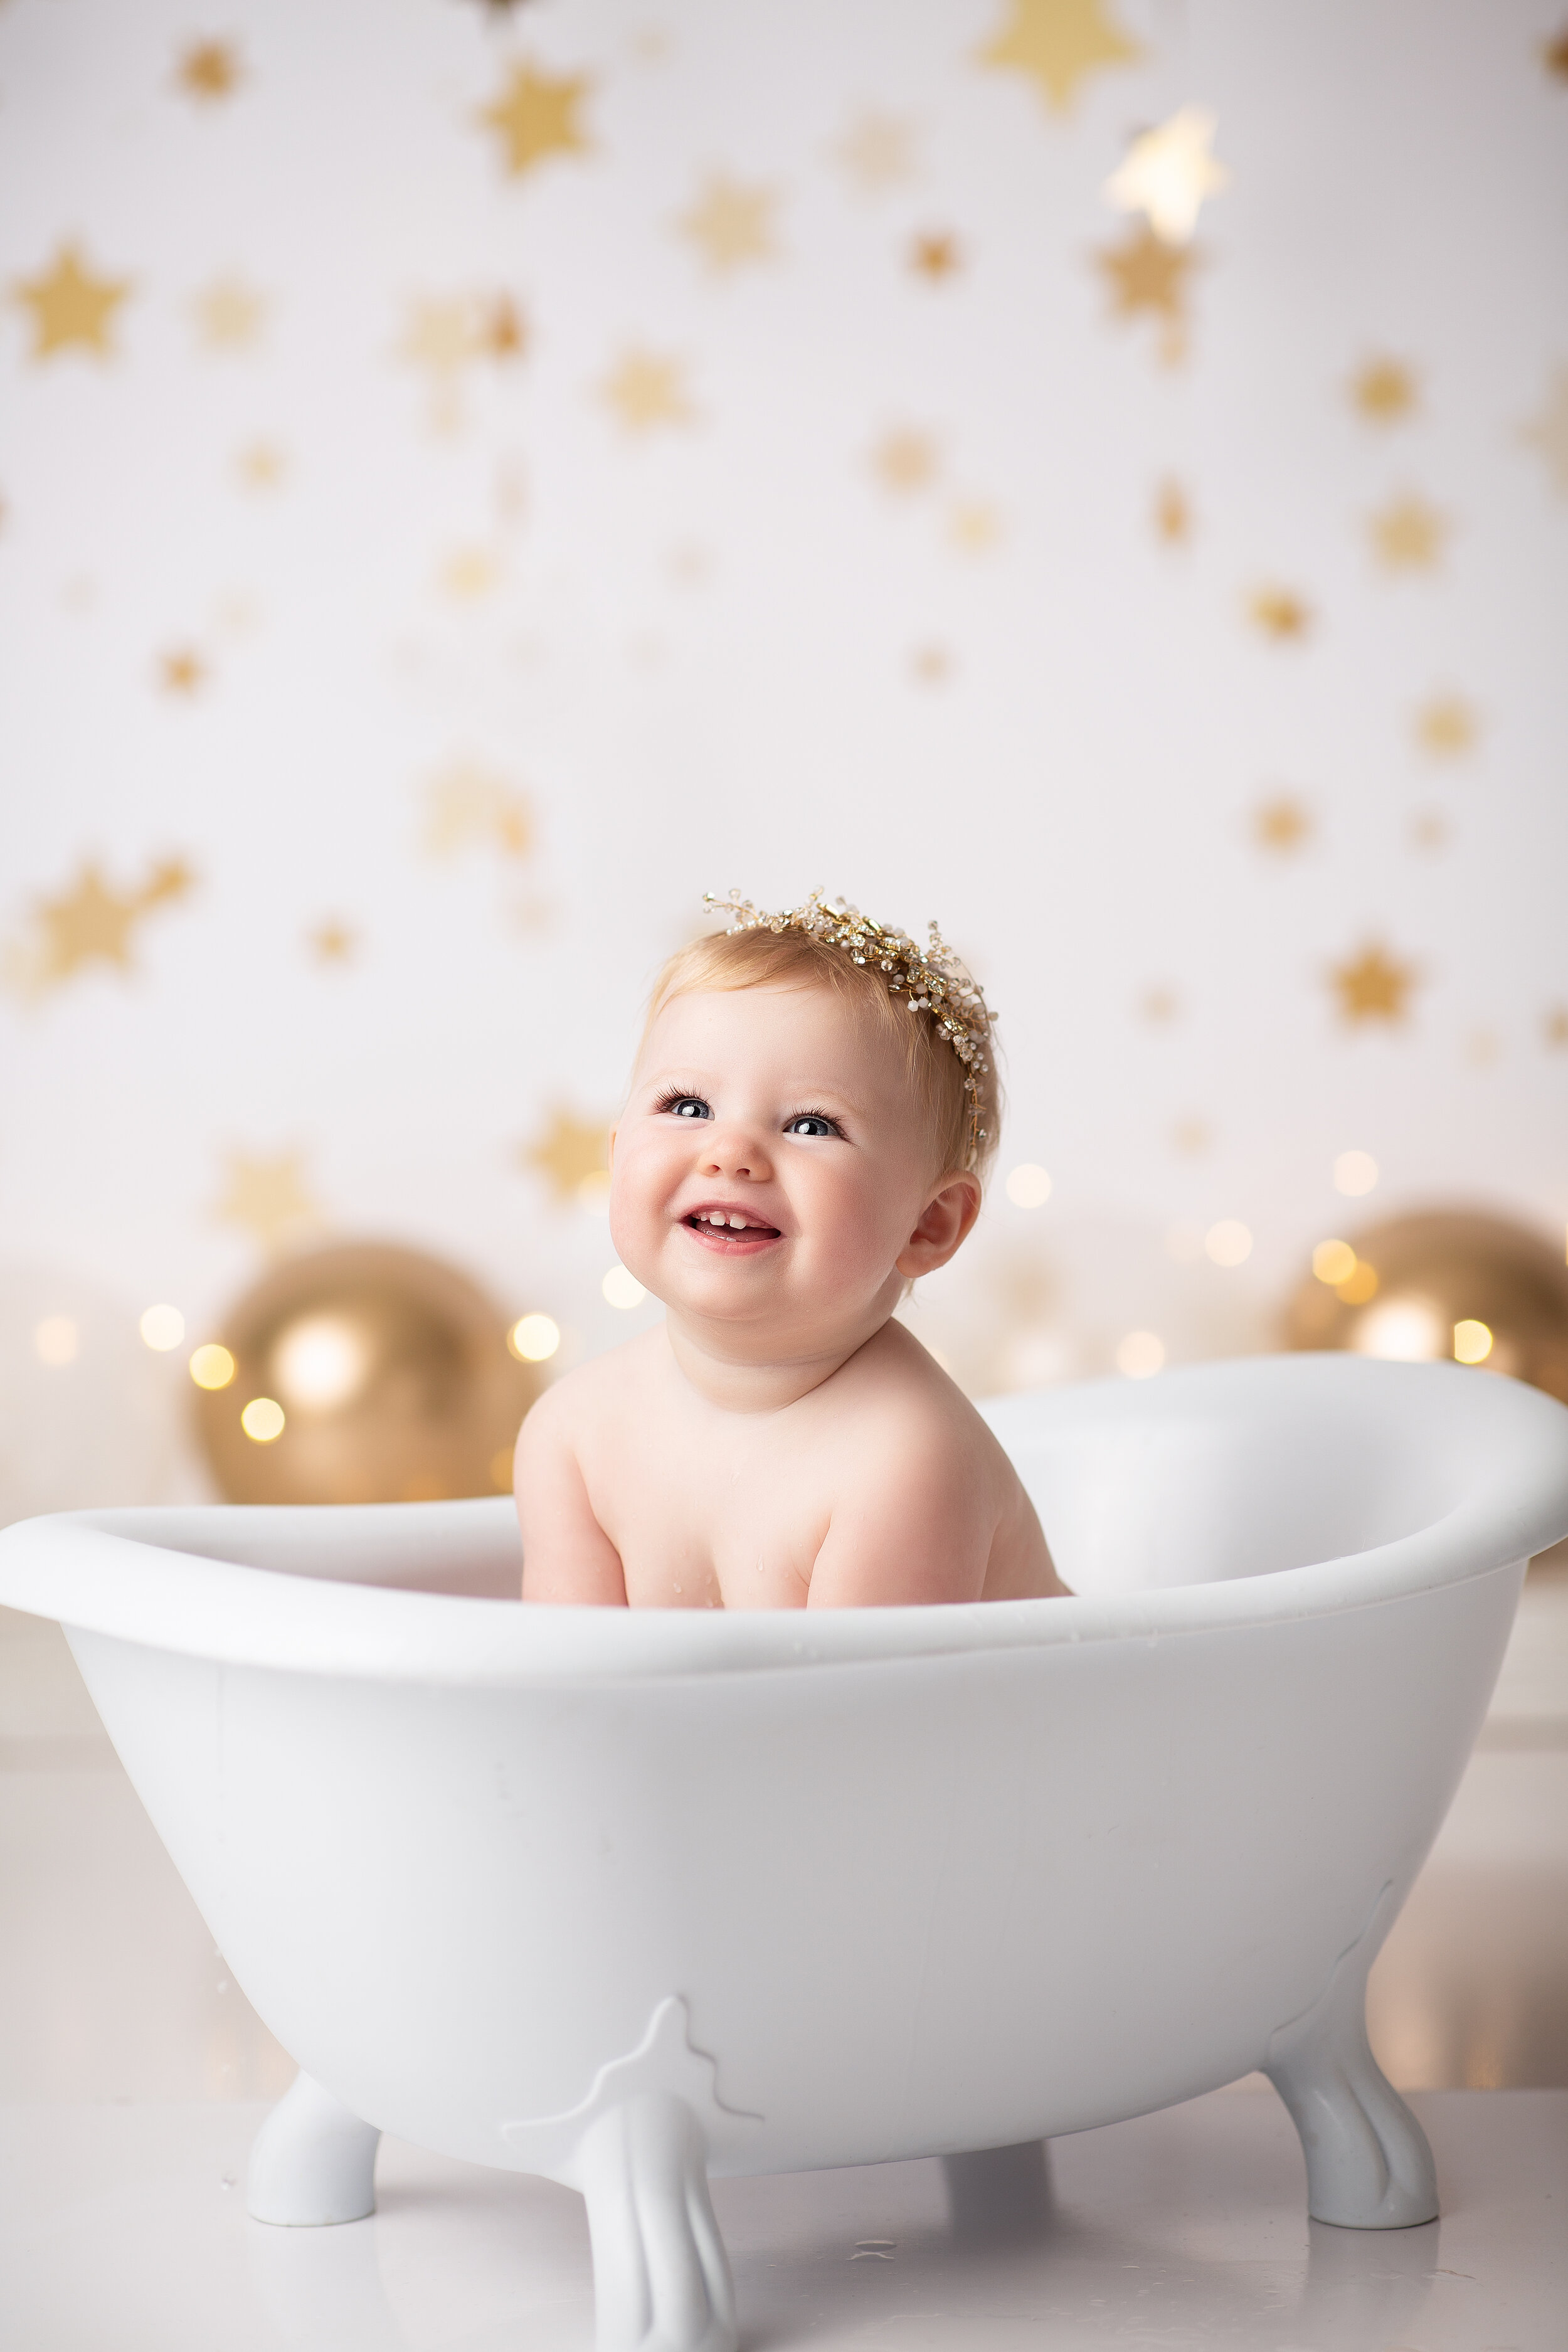  White and gold streamers decorate the studio while baby splashes below in the tub after her cake smash 